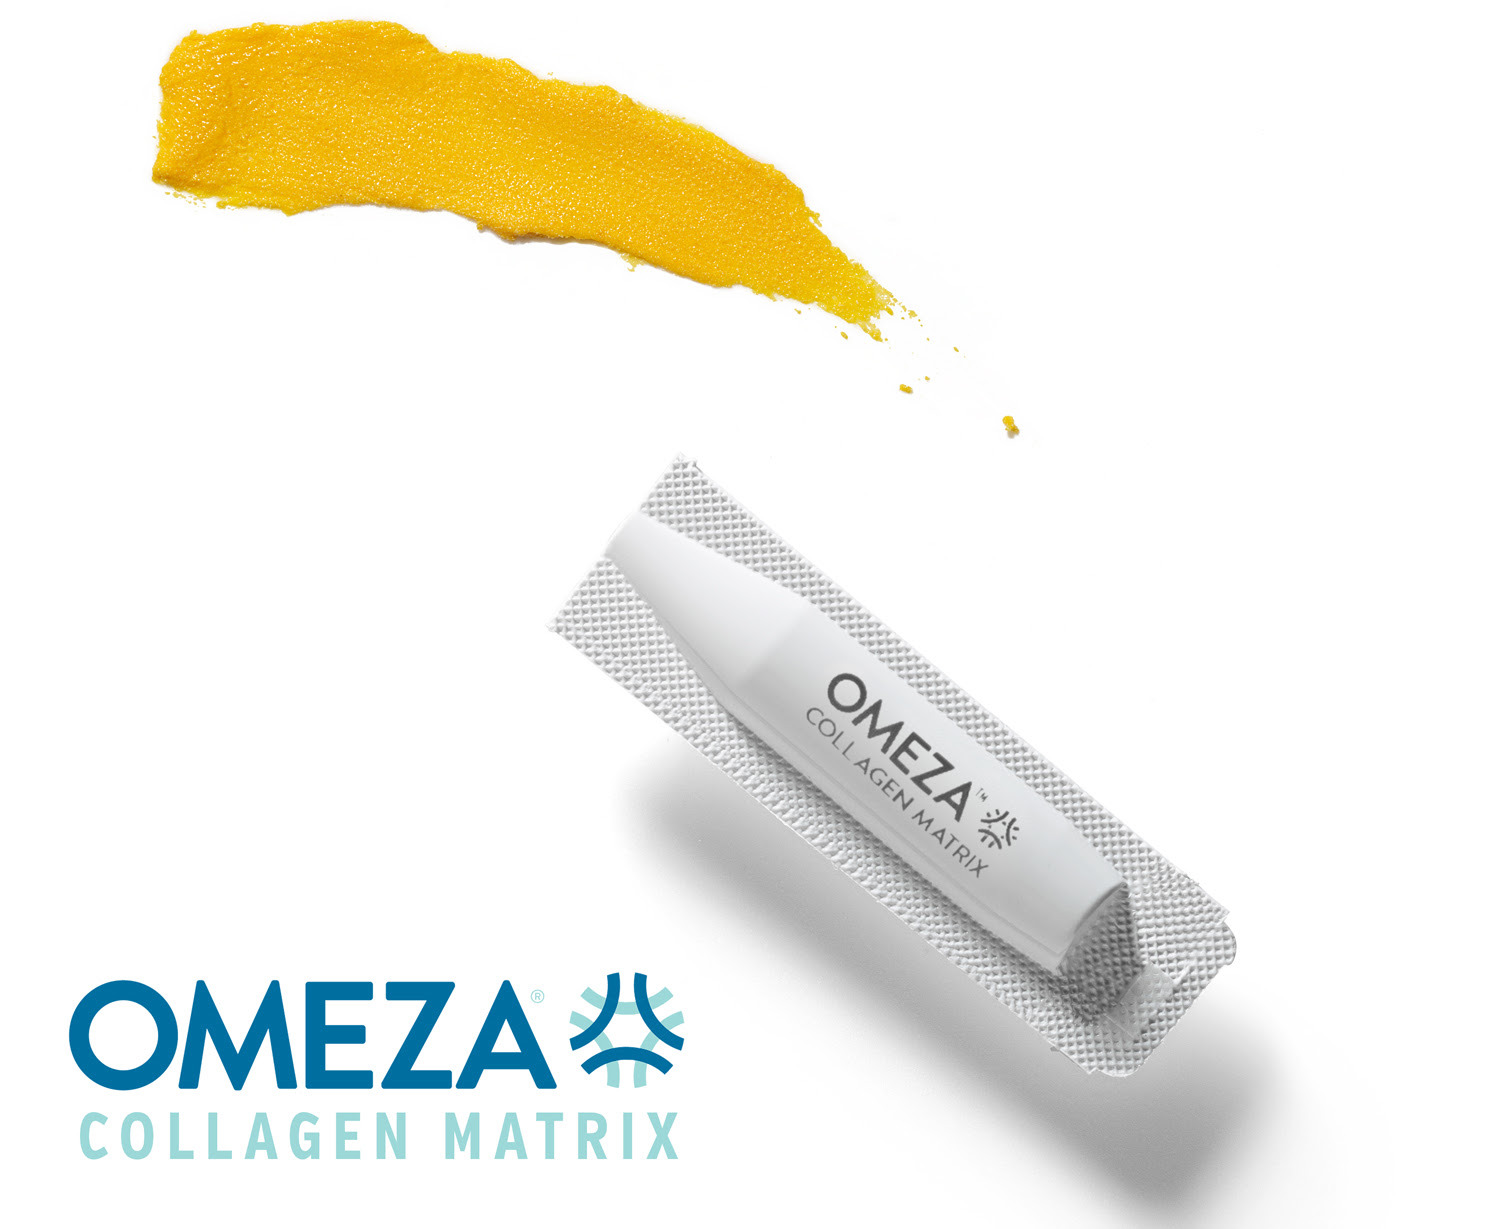 Courtesy. The Omeza Collagen Matrix (OCM) product received FDA clearance for the 510(k) premarket notification process. The matrix is Omeza’s first medical prescription product.